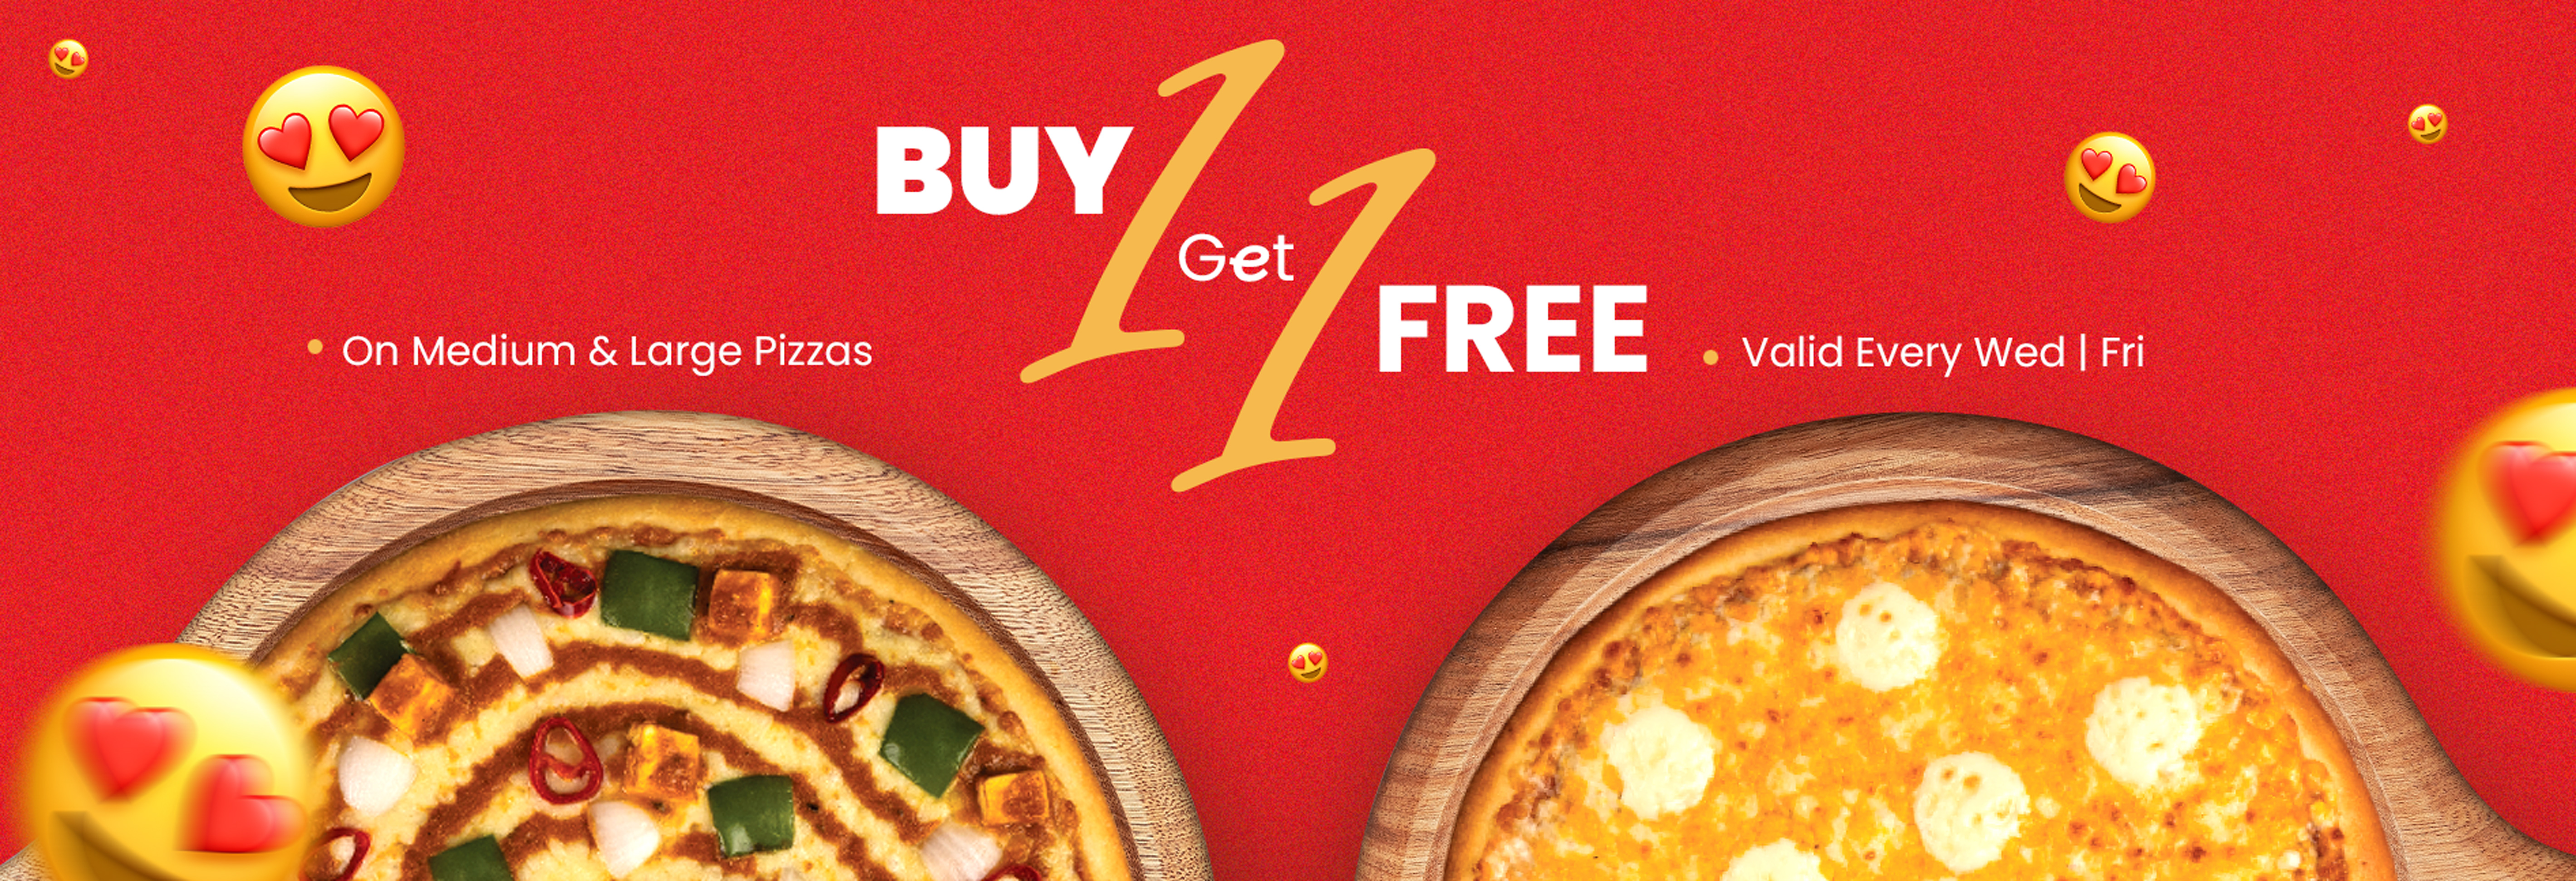 buy 1 get 1 free pizza